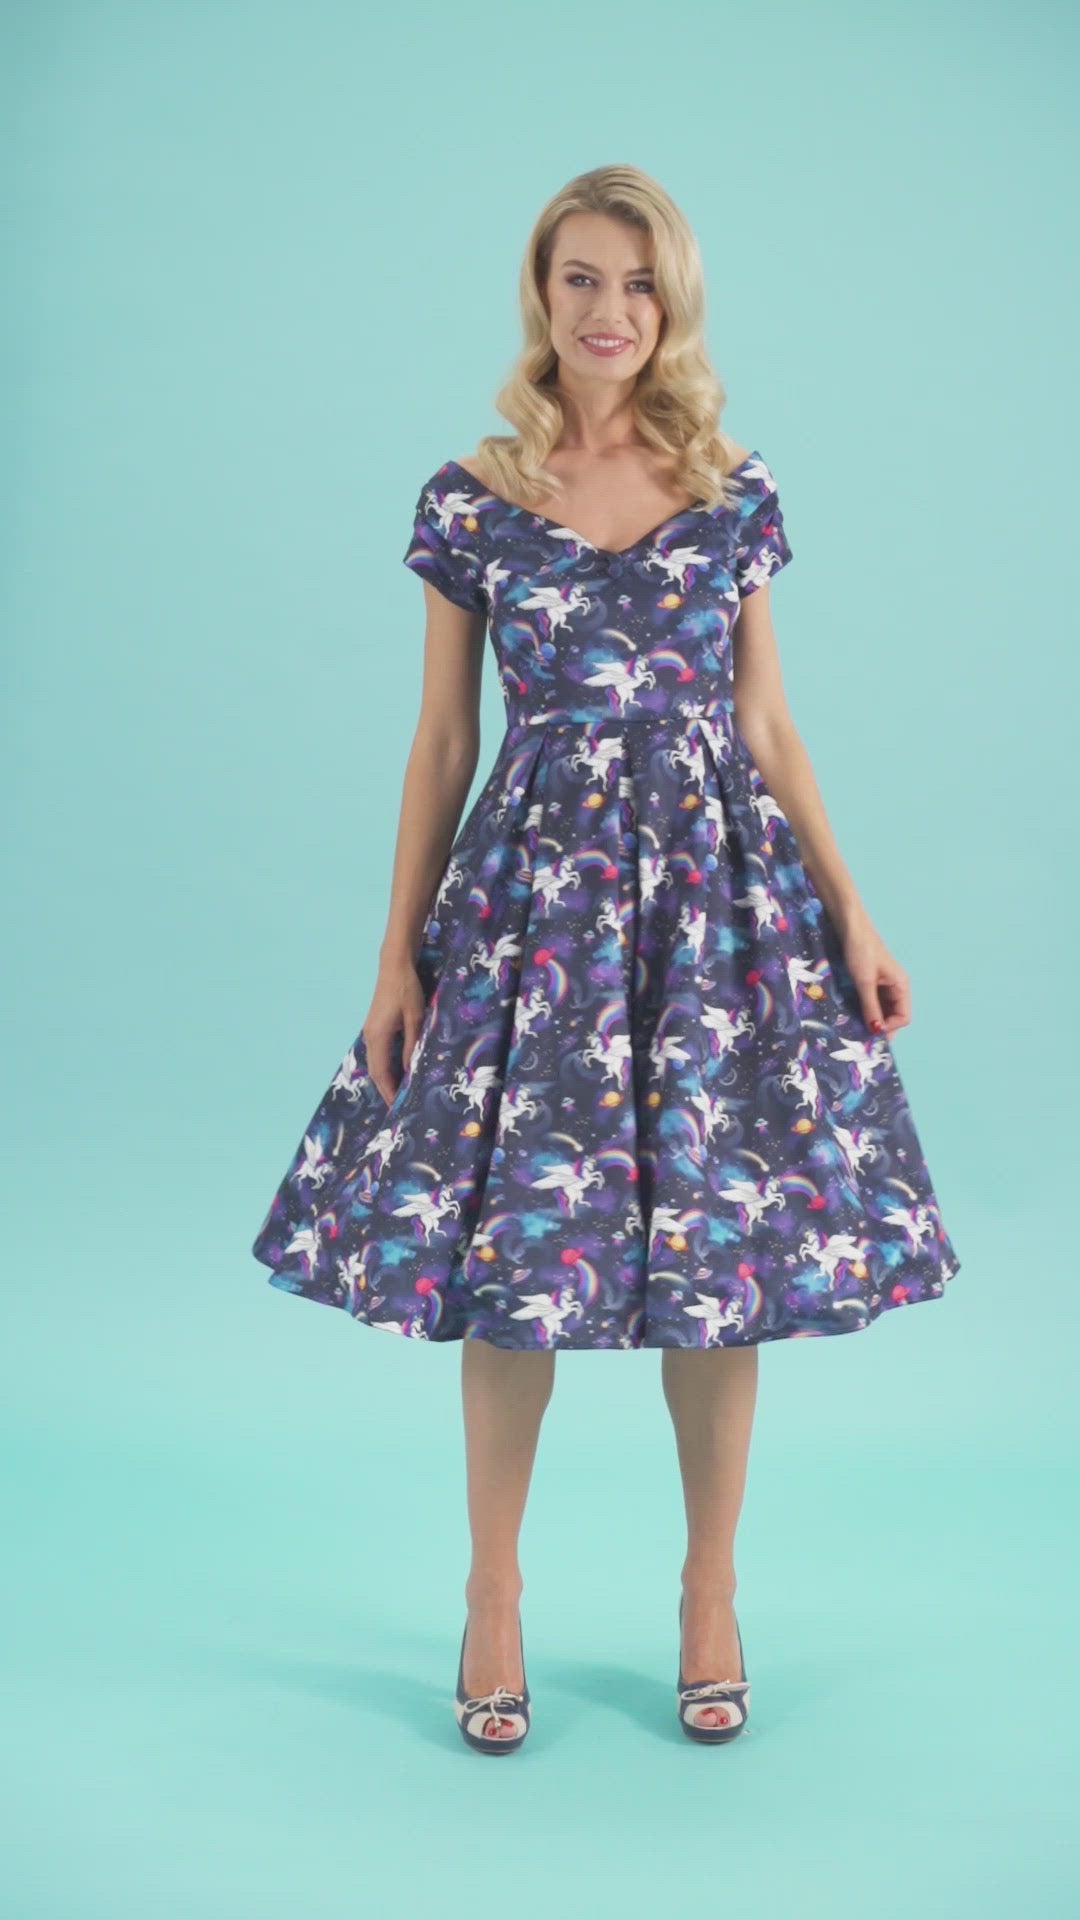 Video of a model twirling, wearing our Lily Retro Off Shoulder Unicorn Swing Dress.